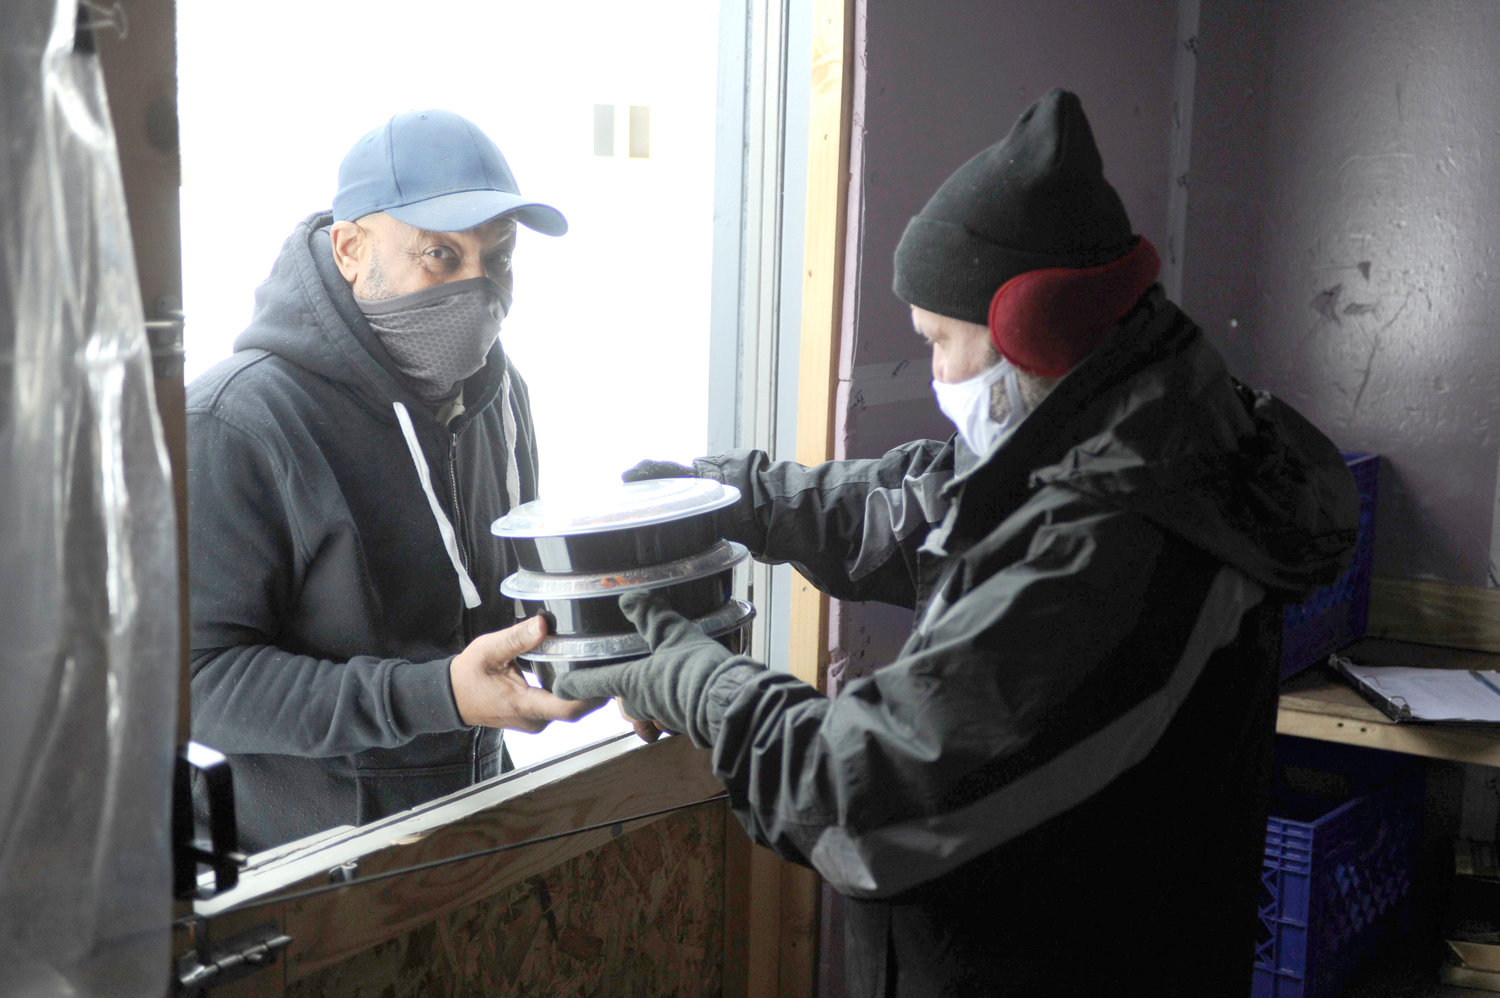 Angel Rodriguez, the Federation’s stock clerk, stated out as a volunteer in 2009 and was promoted a few years later. He is pictured handing out several containers of hot food to someone in need.